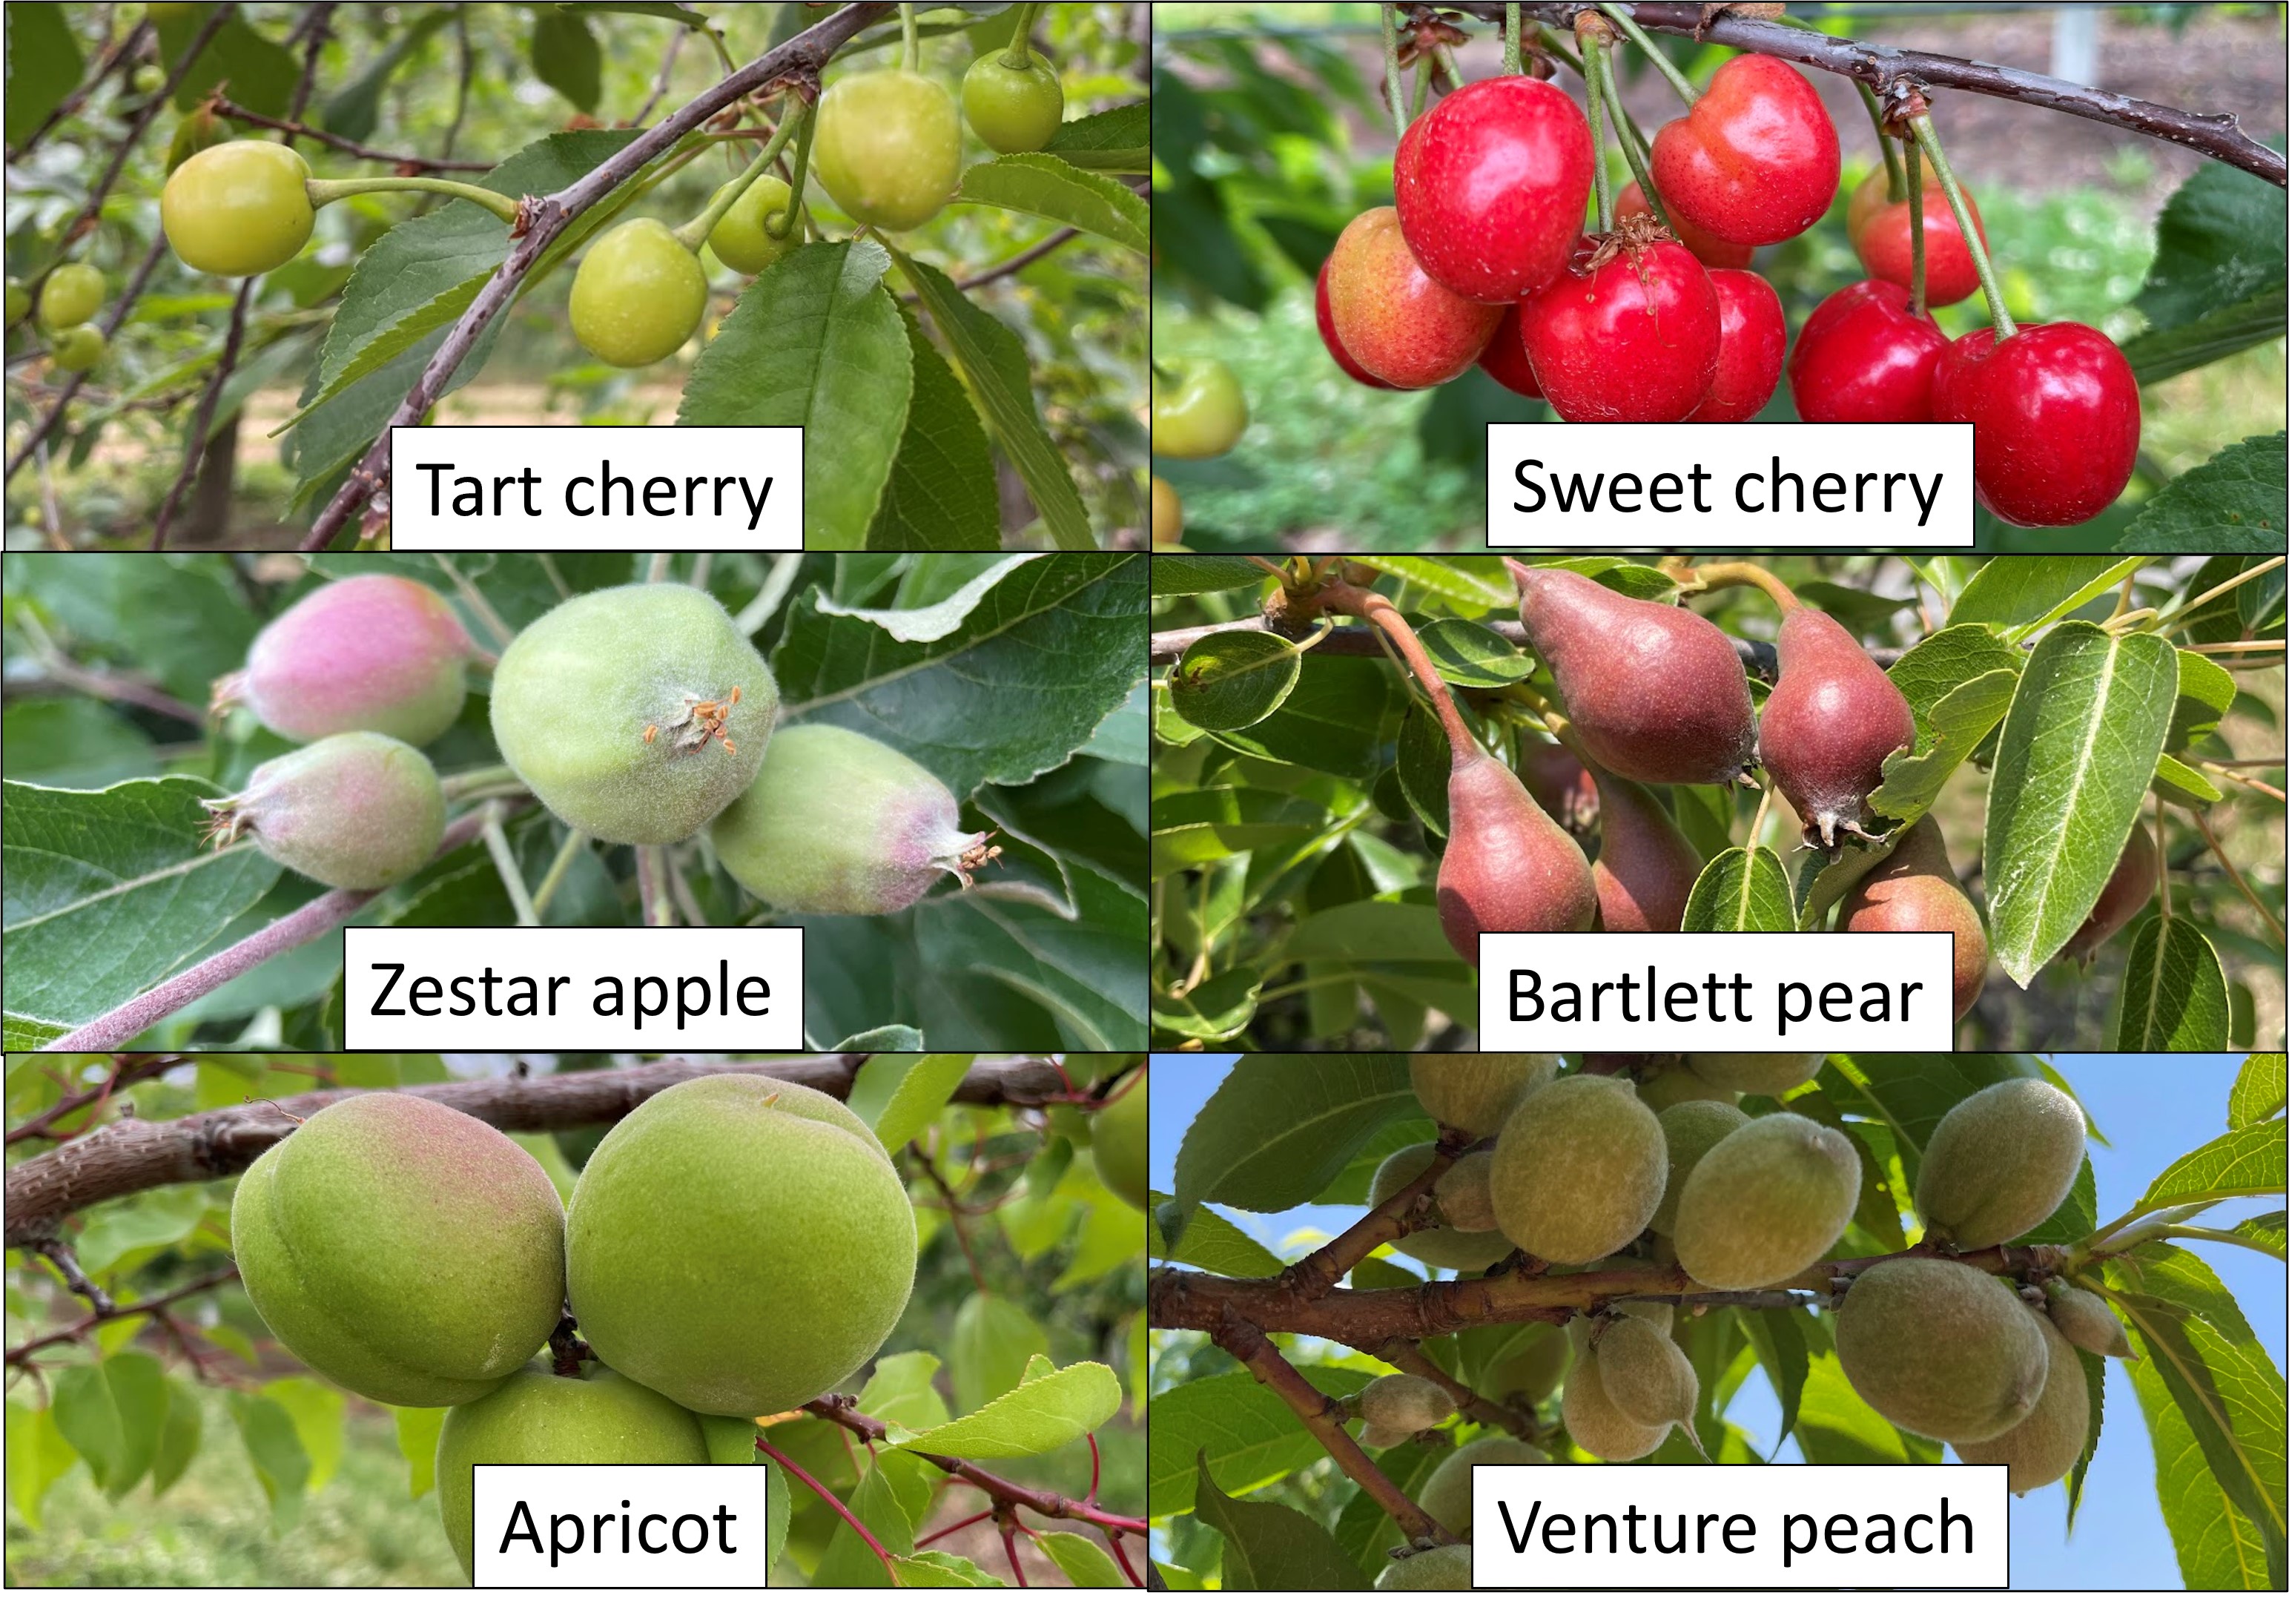 Stage of tree phenology for tart cherry, sweet cherry, peach, apricot, apple and pear.